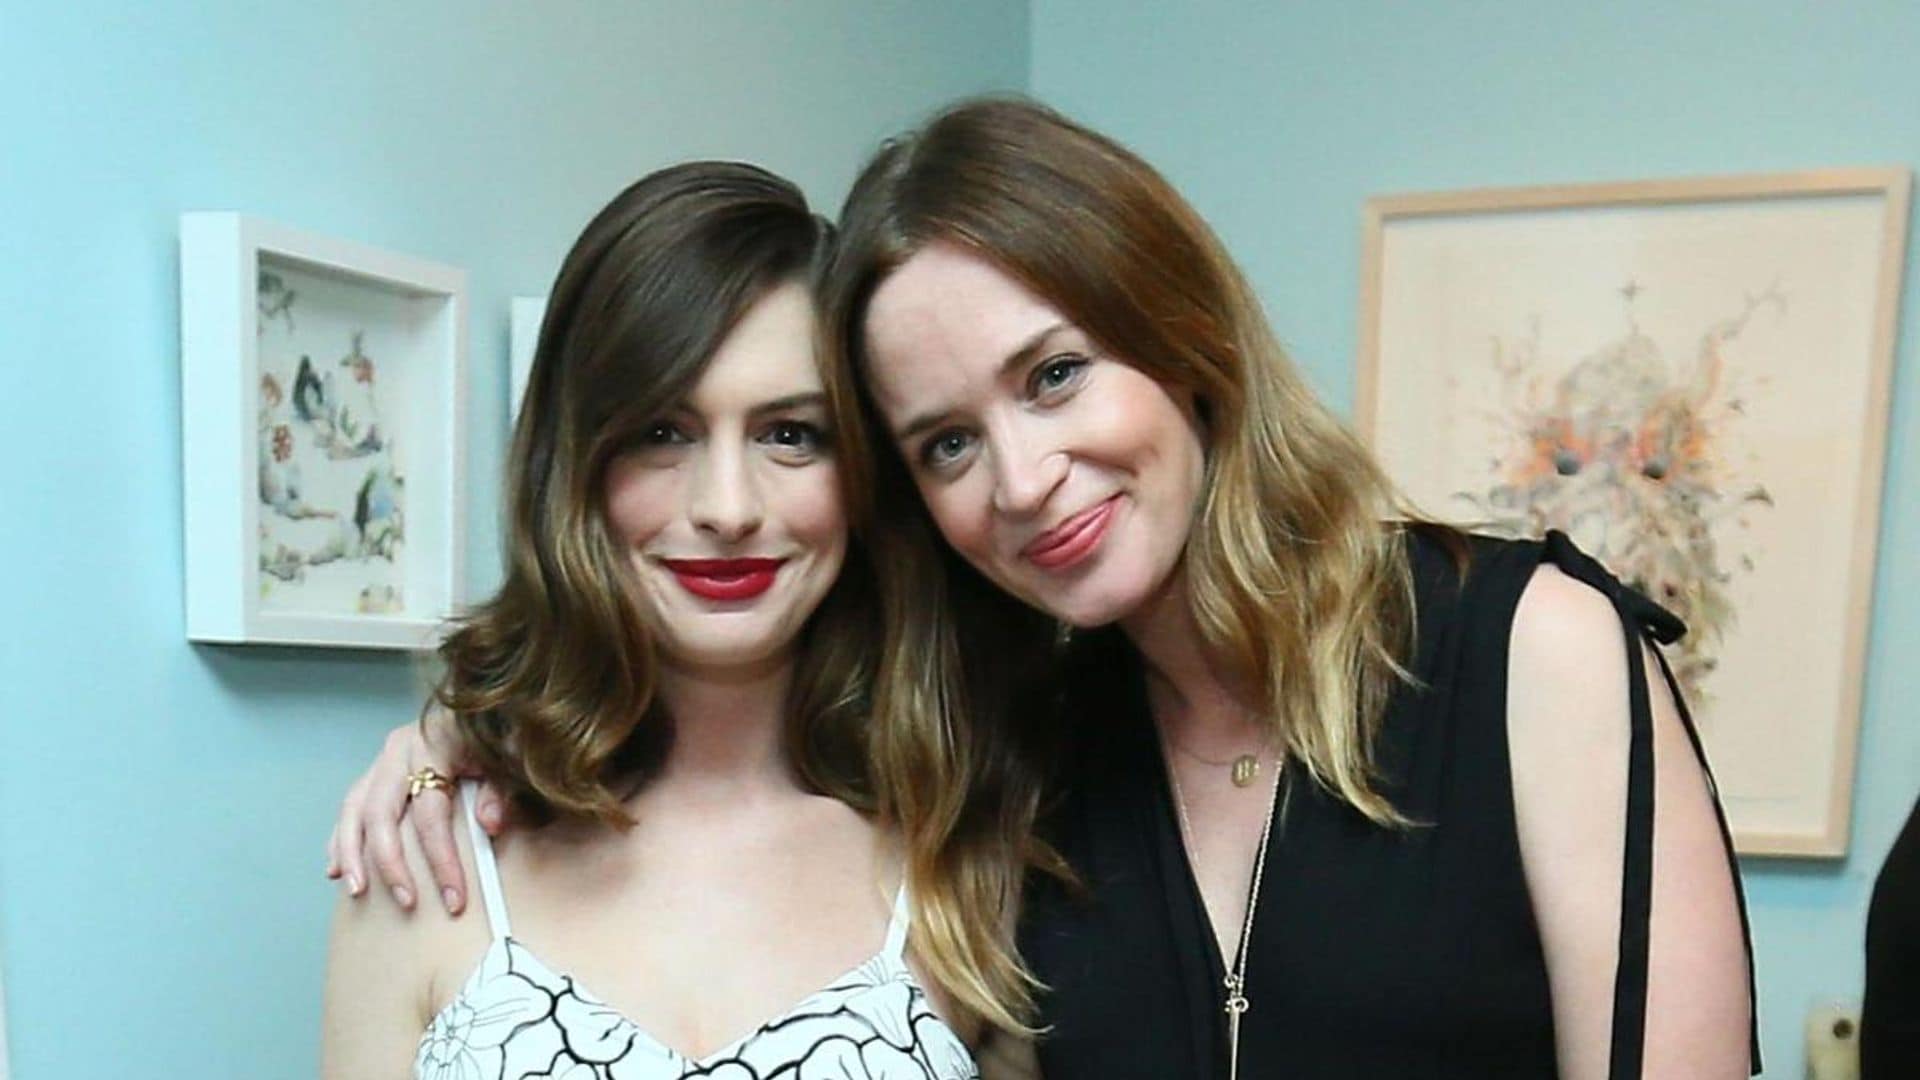 Anne Hathaway and Emily Blunt reunite after 17 years of ‘The Devil Wears Prada’ release